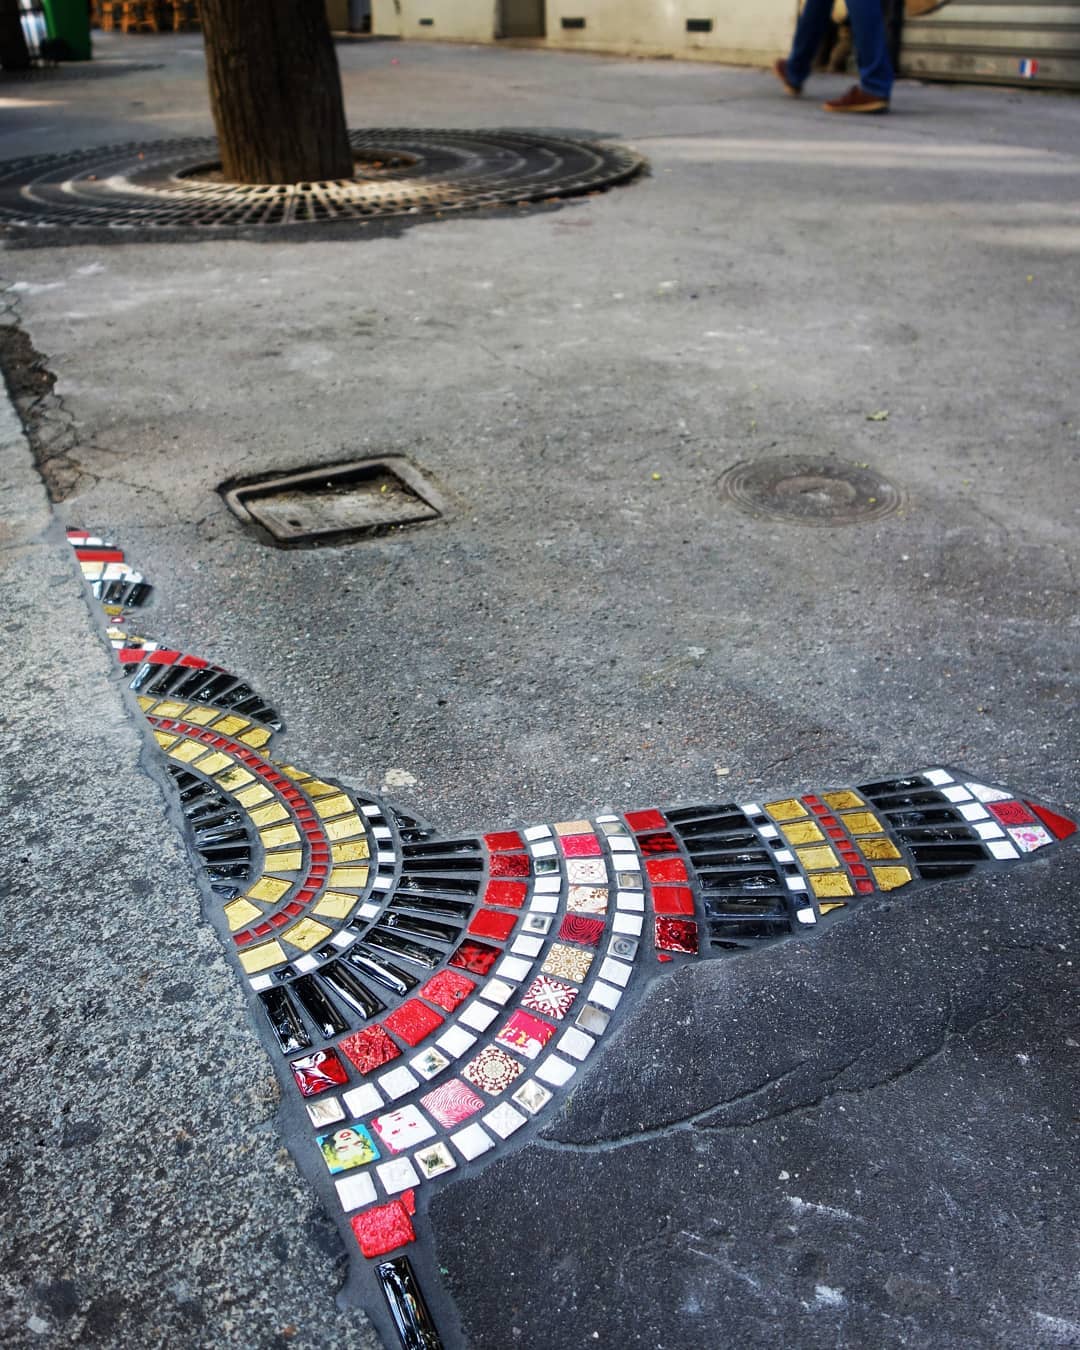 Fractured Sidewalks Pavements And Walls Repaired With Vibrant Tiled Mosaics By Ememem 14